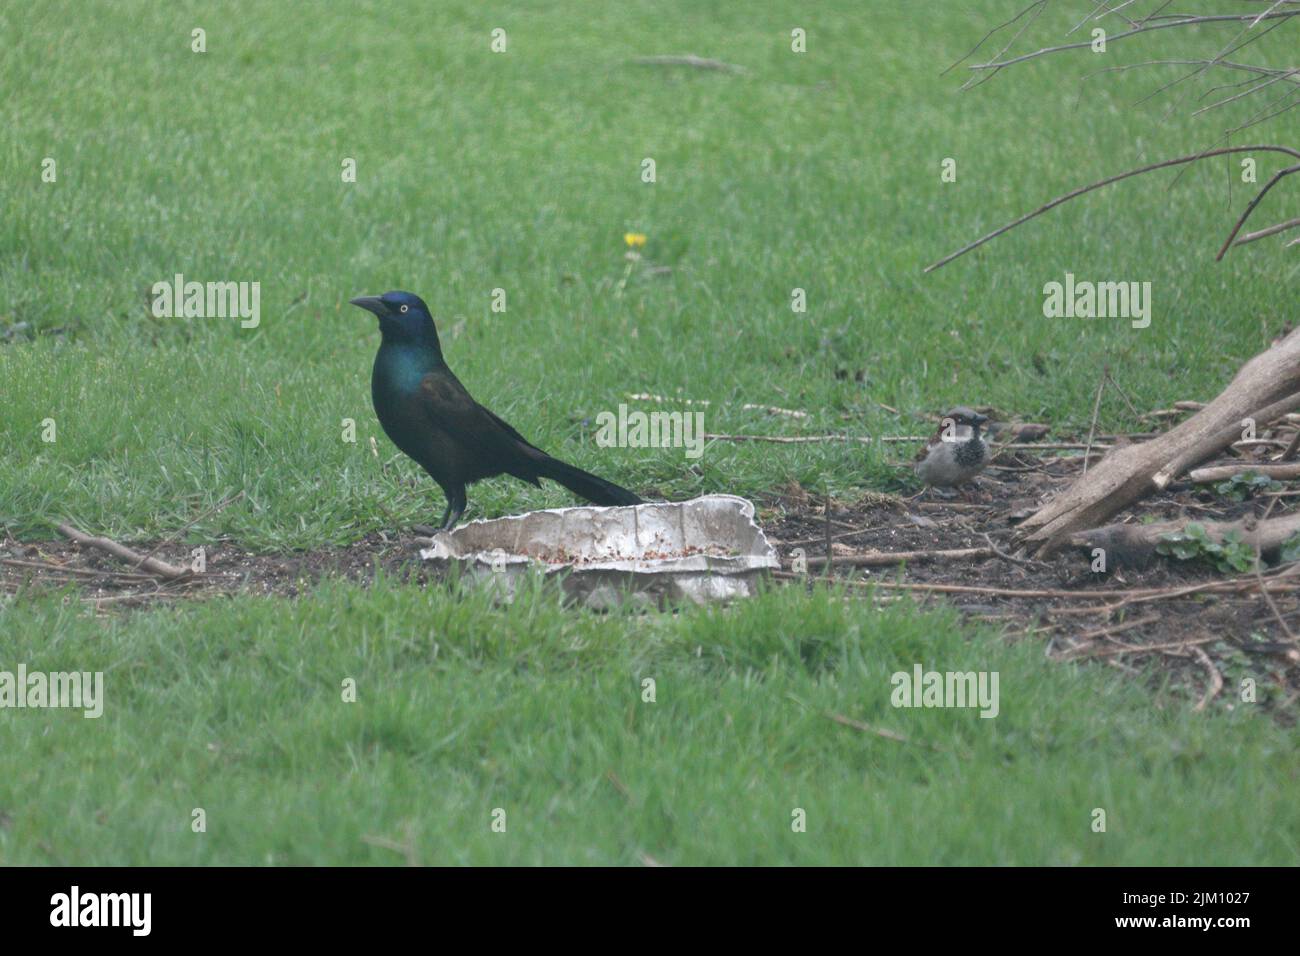 A beautiful shot of two birds standing on the green grass at the park during daytime Stock Photo